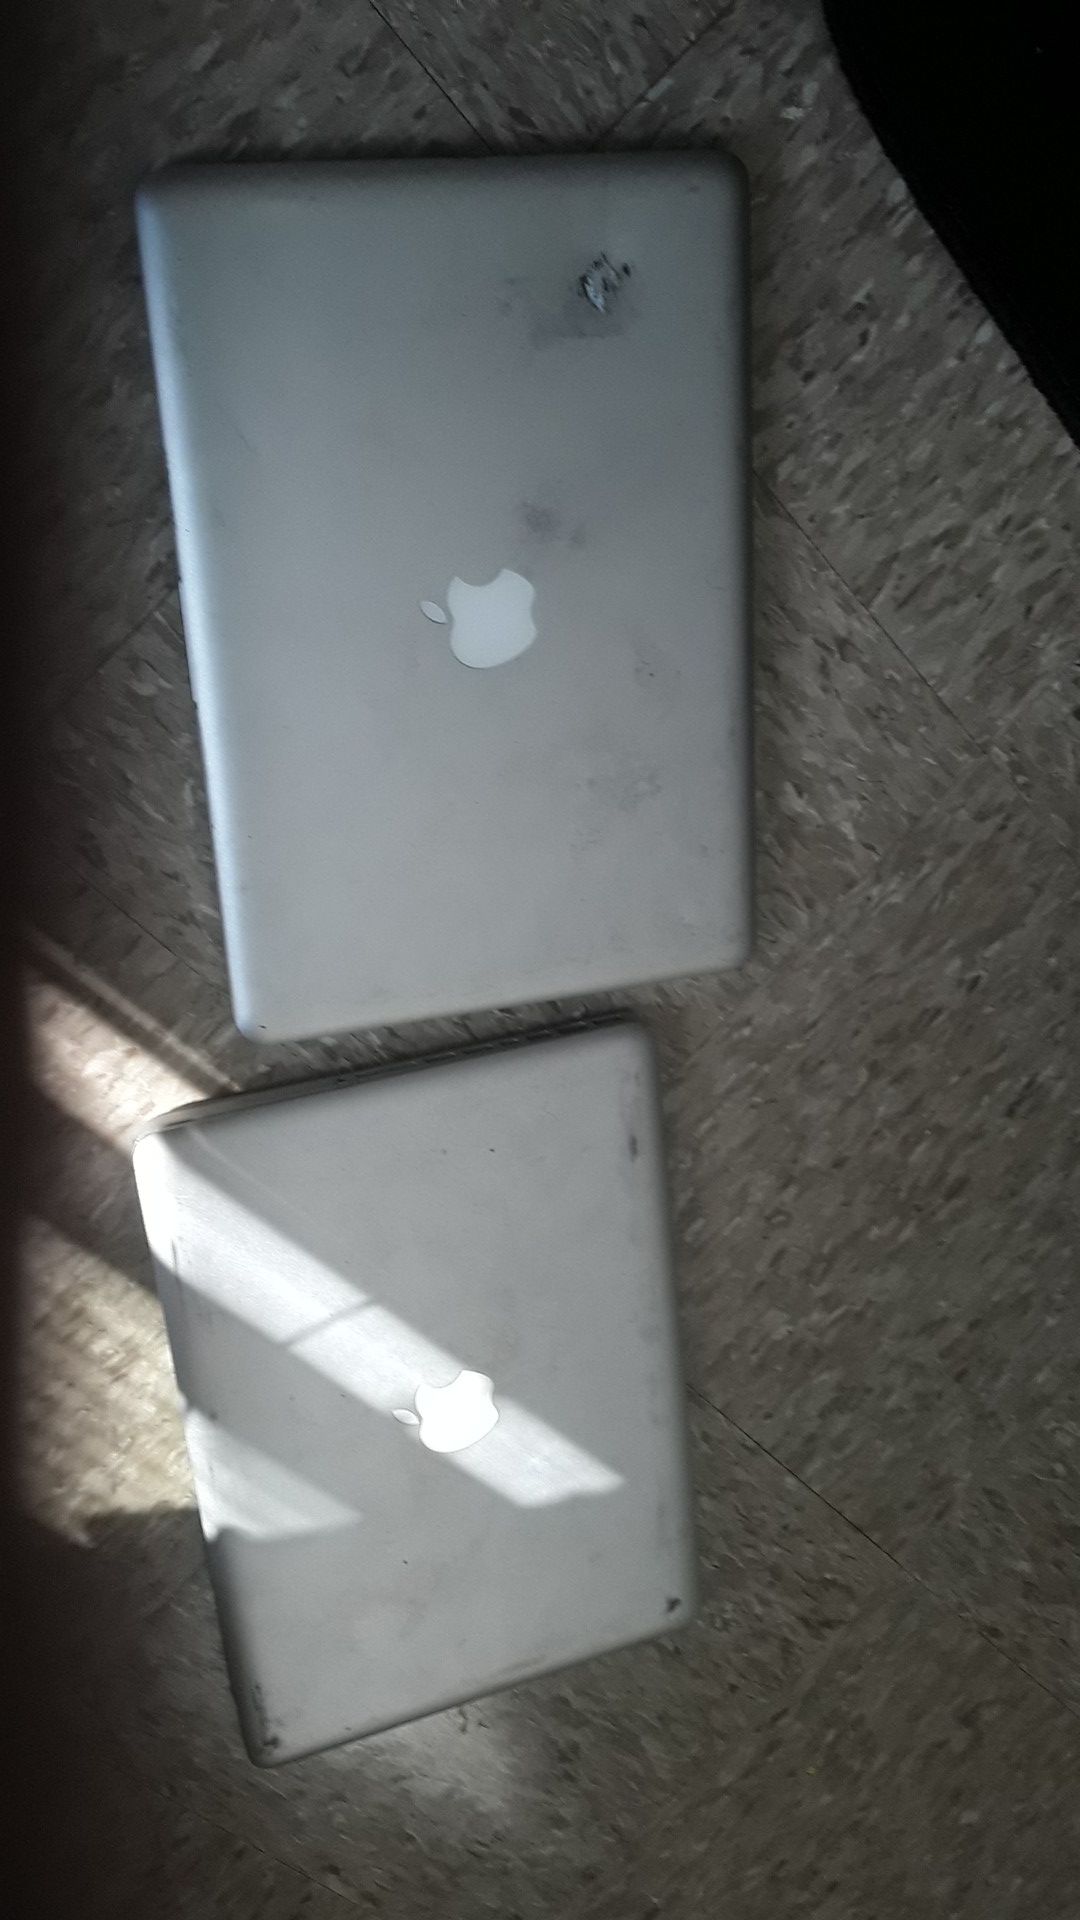 Two mac book pros